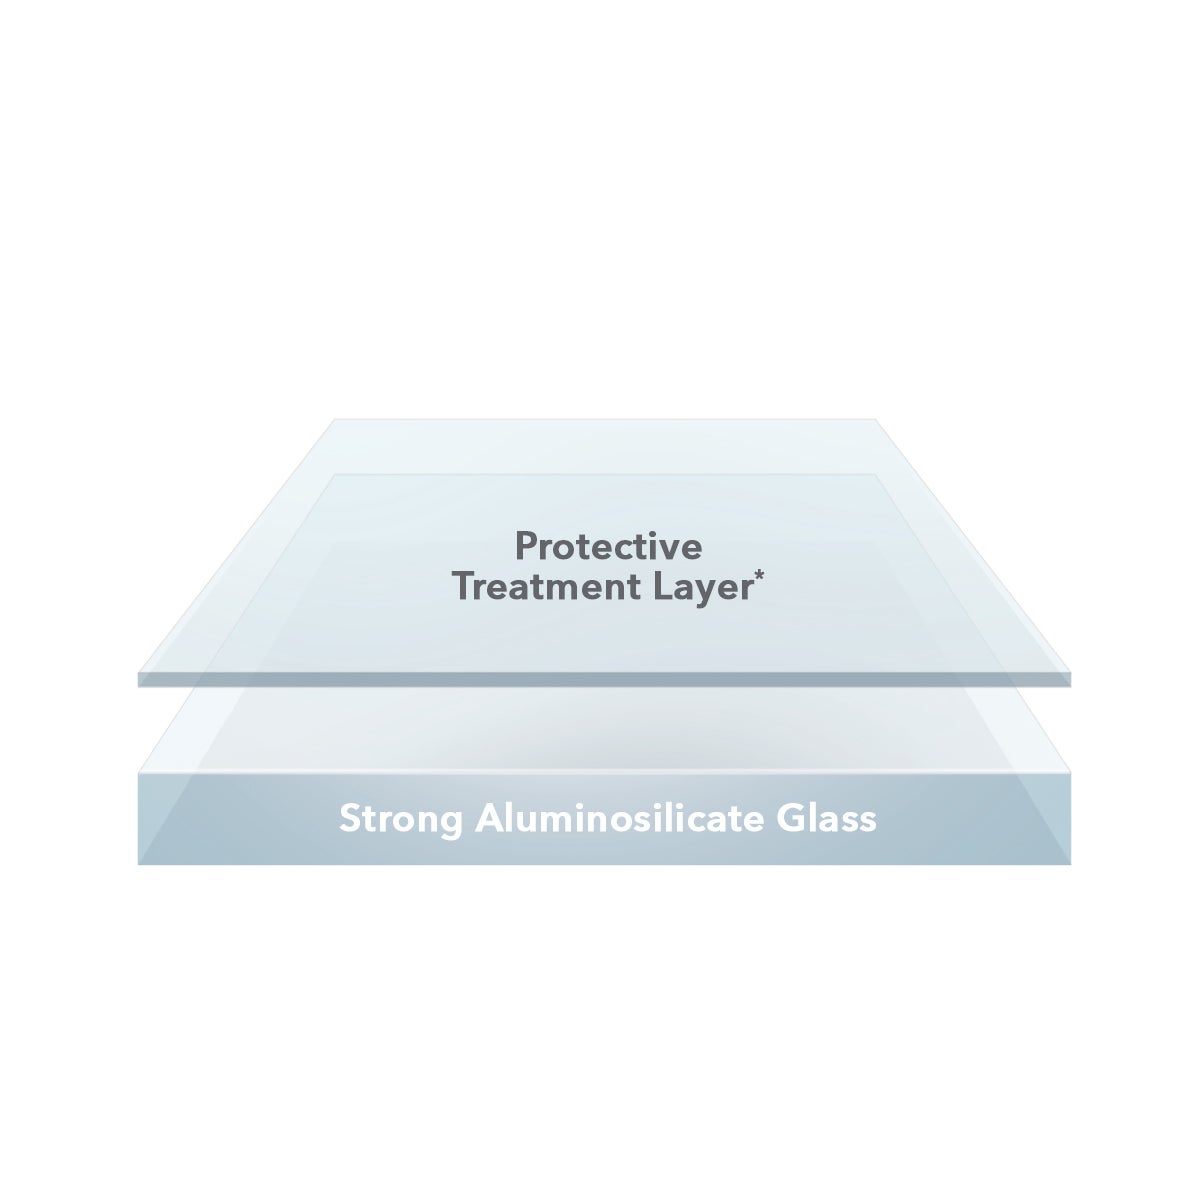 Anti-Microbial Properties
||Contains anti-microbial treatment that protects your screen protector, guarding against degradation from microorganisms.